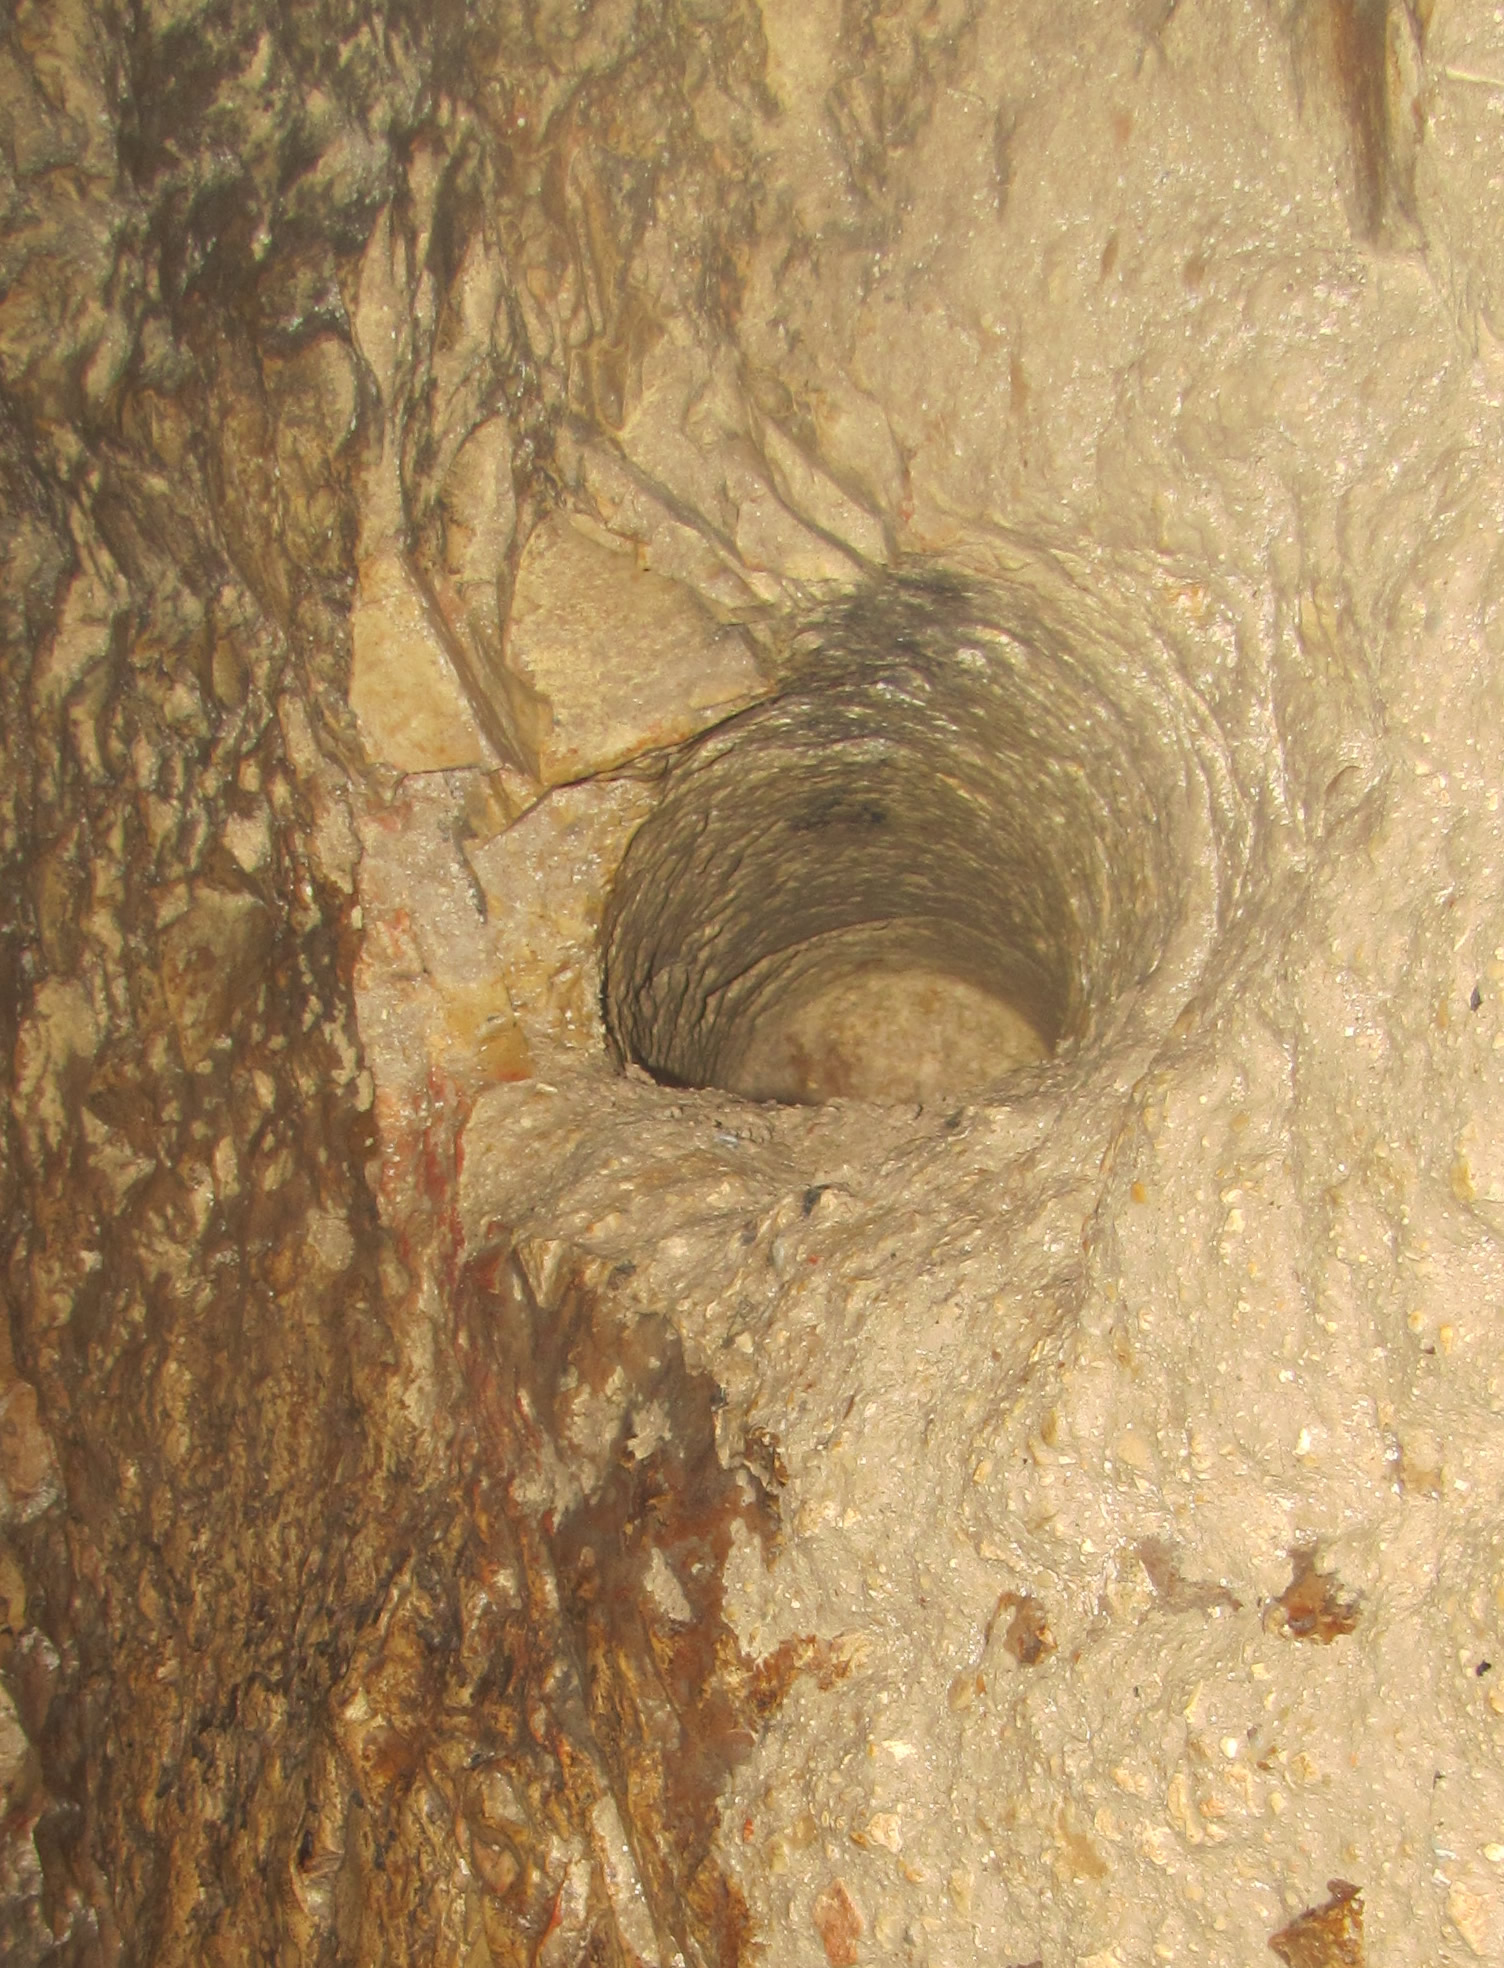 Hole for holding torch or light in Hezekiah's Tunnel